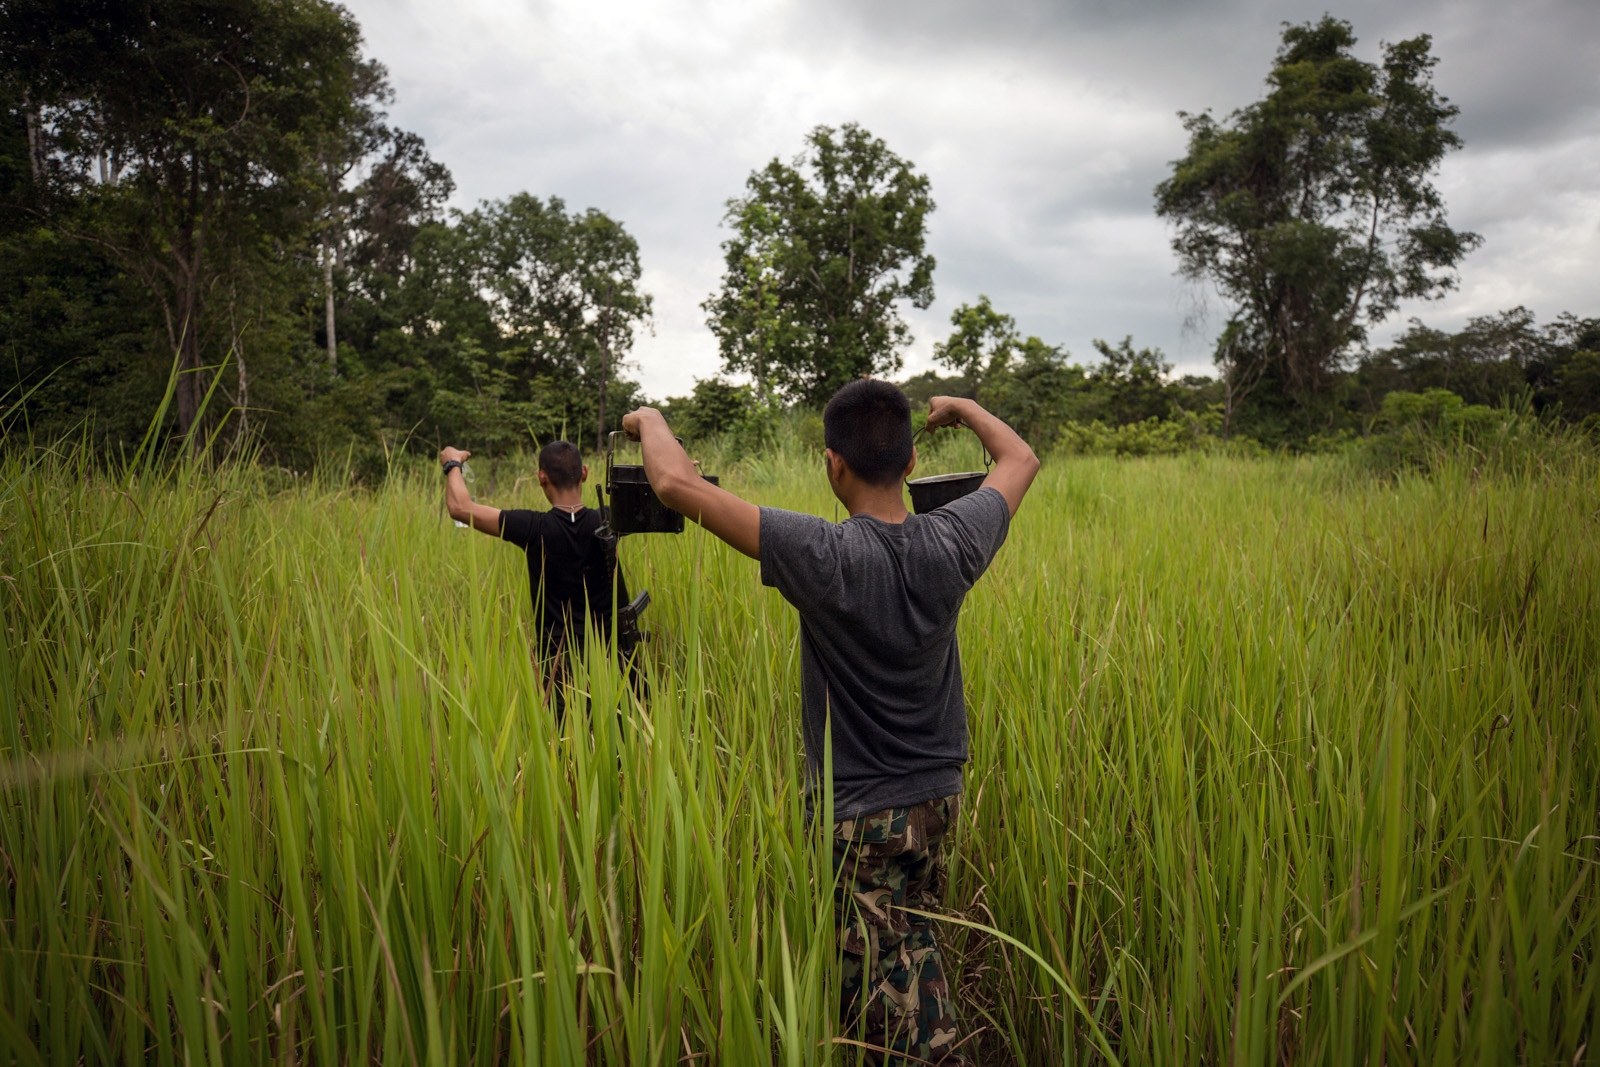 PROTECTING THAILANDS ROSEWOOD - Rangers hold cooking pots full of water collected from a...